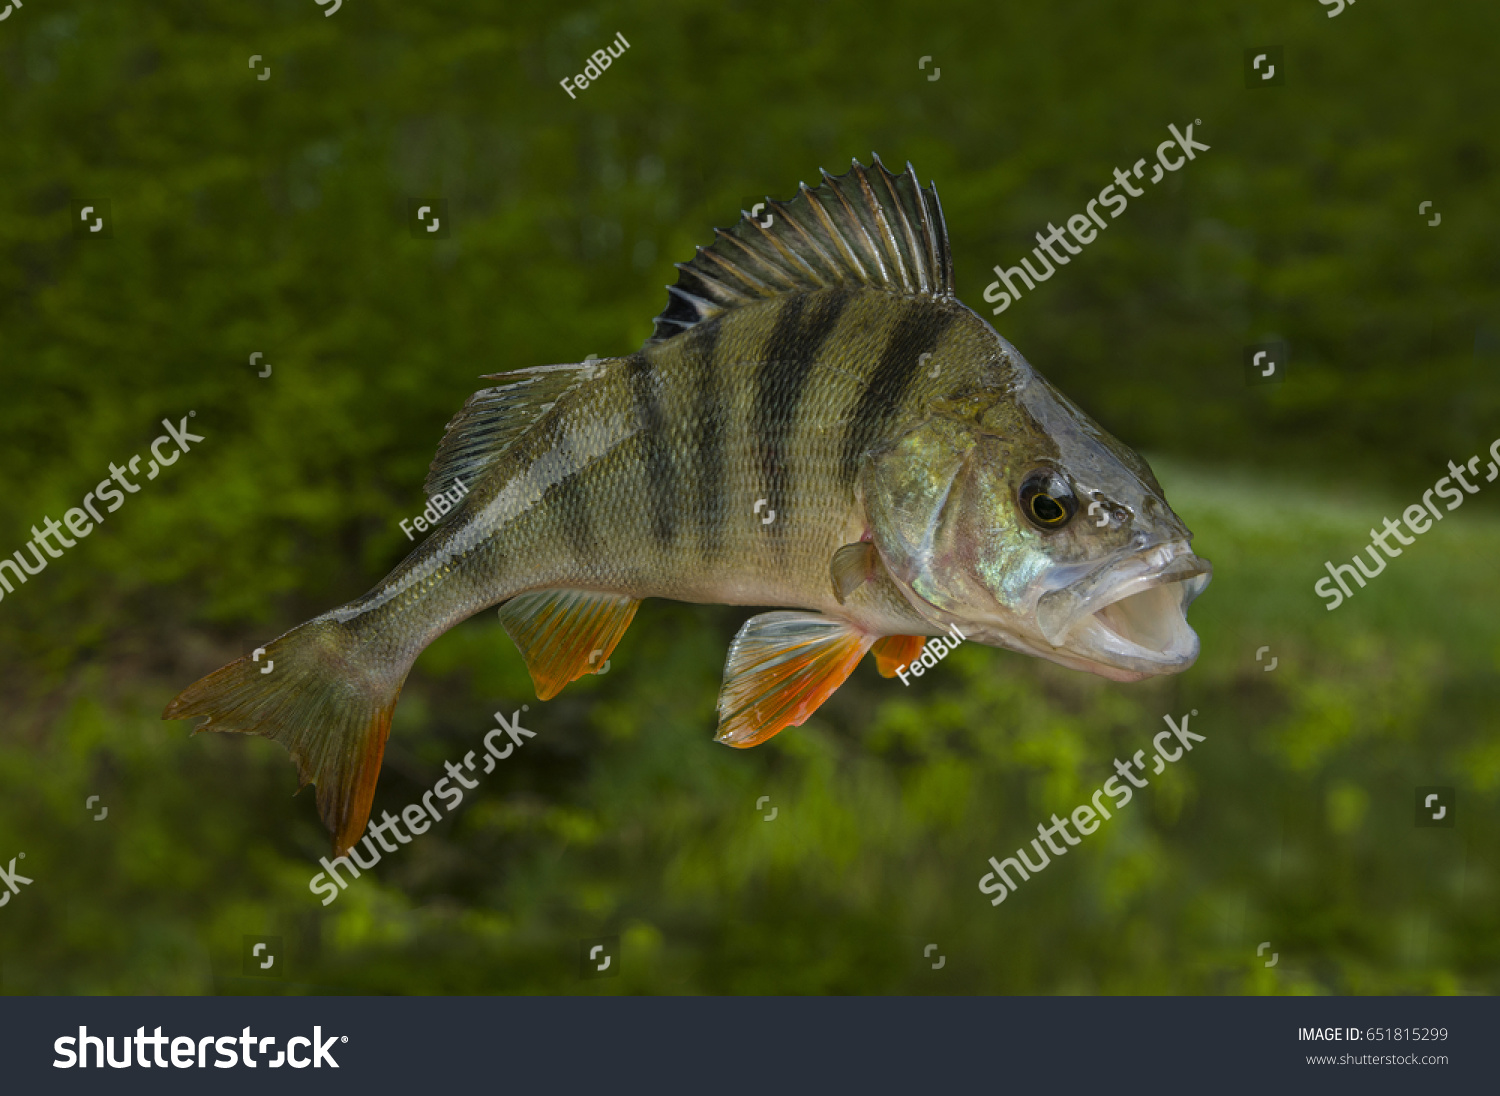 Fishing background with perch fish #651815299